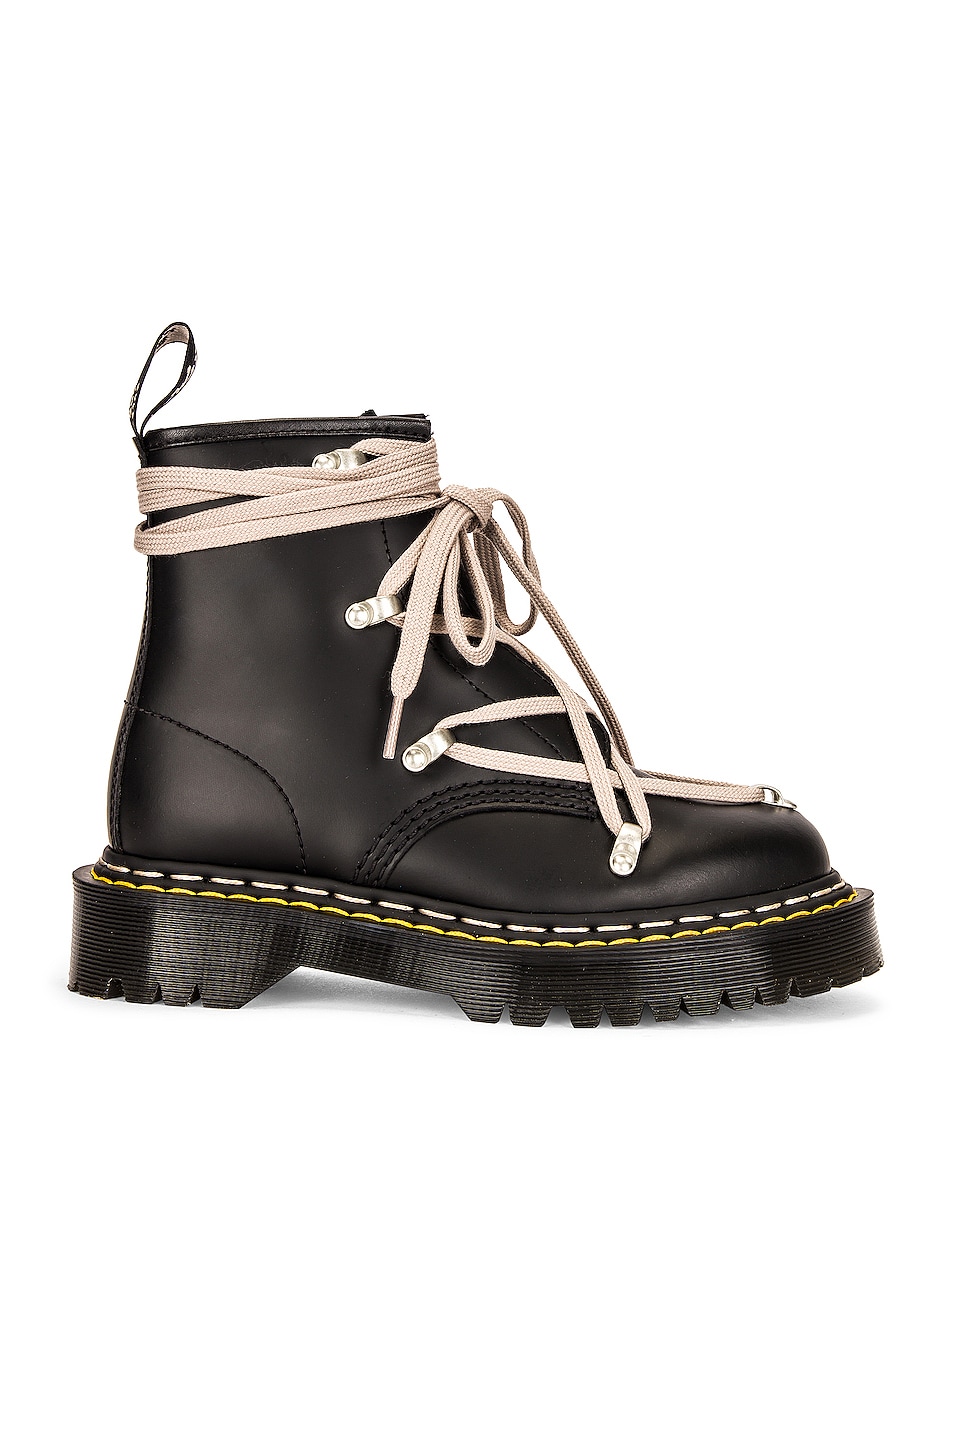 Image 1 of Rick Owens x Dr. Martens Bex Sole Boot in Black